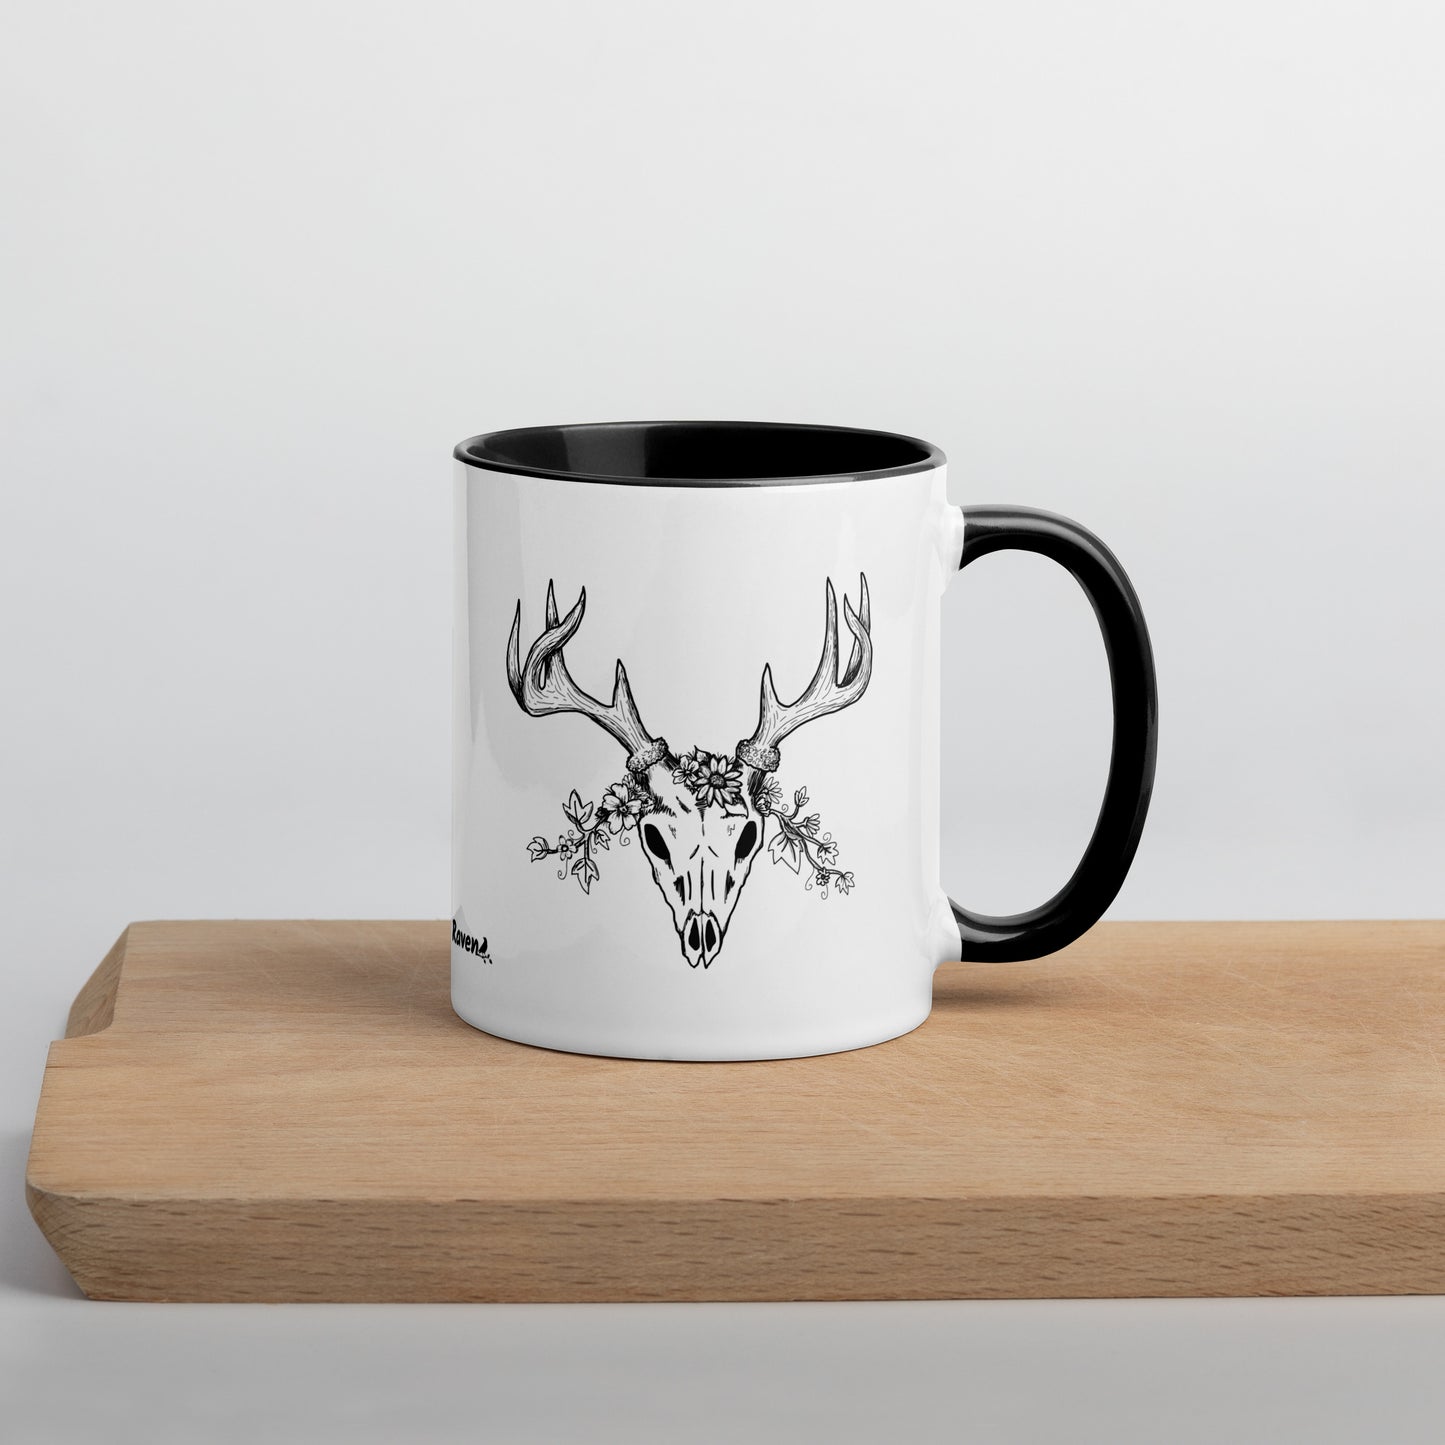 11 ounce ceramic mug with hand illustrated deer skull wreathed in flowers. Double-sided design. Mug has black rim, handle, and inside. Shown sitting on wooden cutting board with handle facing right.